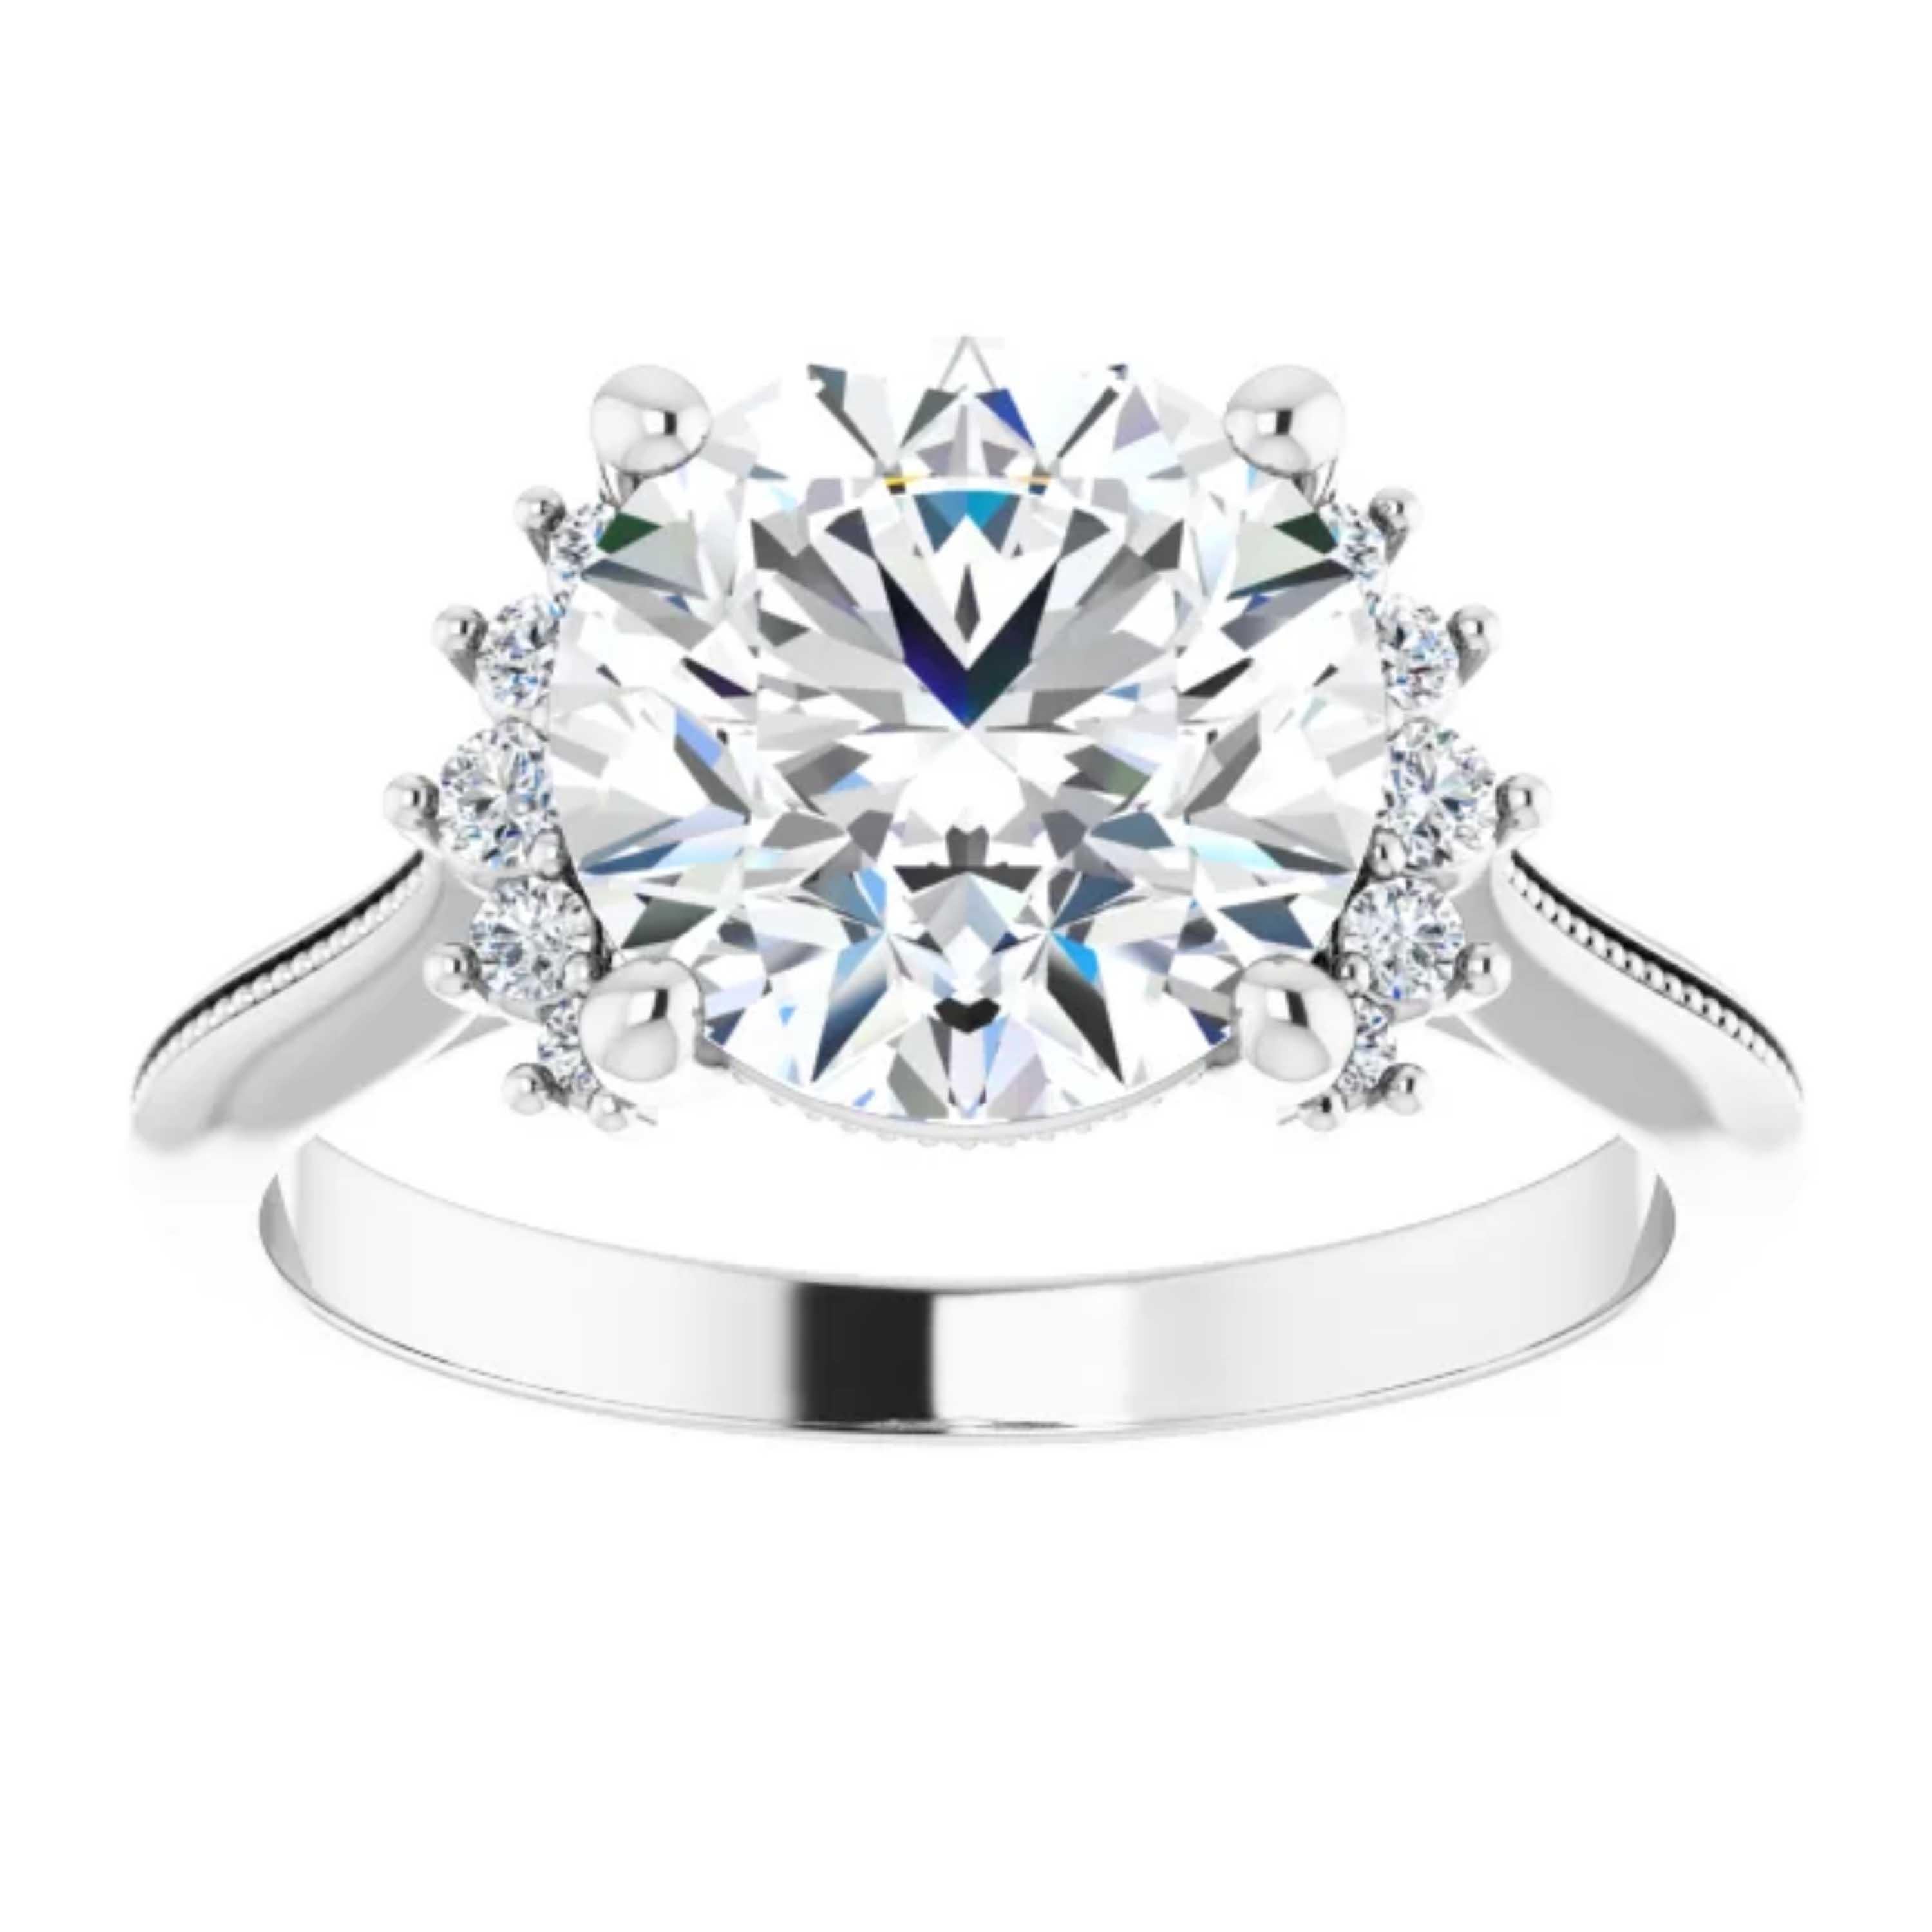 Round Cut Vintage Style Halo GIA Round Diamond Engagement Ring 18k White Gold 1.05 Carats For Sale